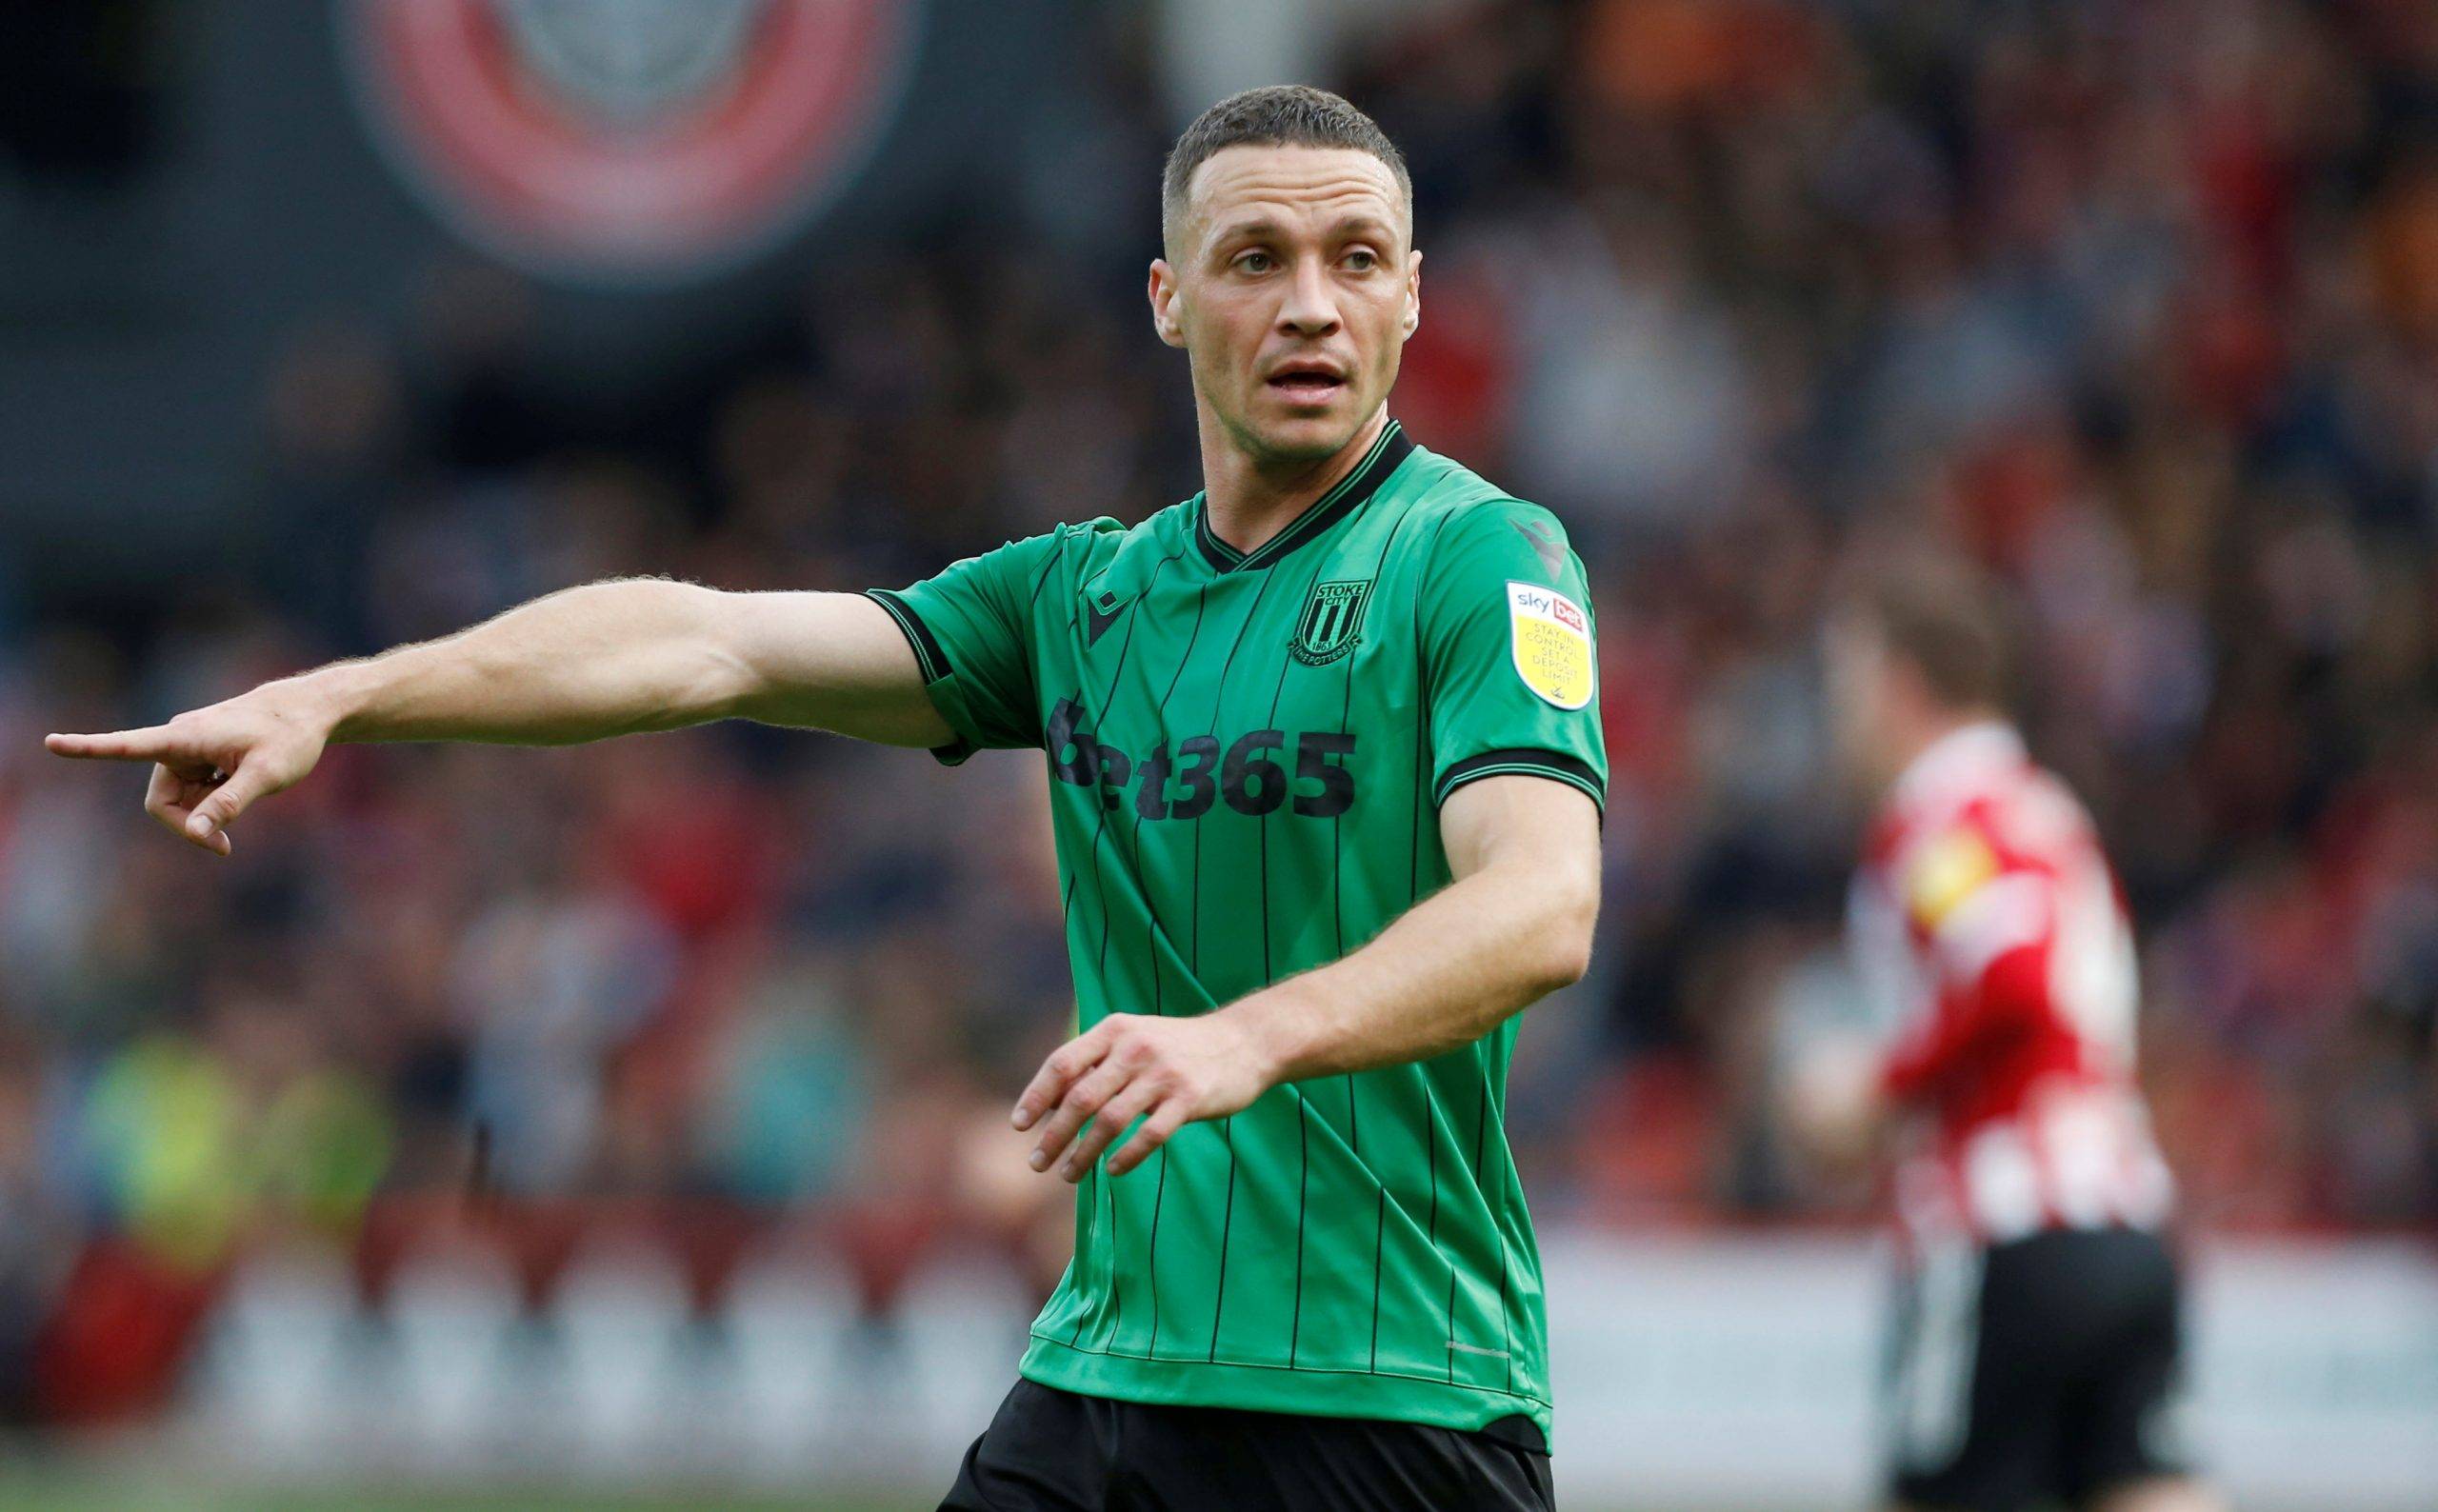 Derby County: James Chester ruled out vs Charlton Athletic - Derby County News